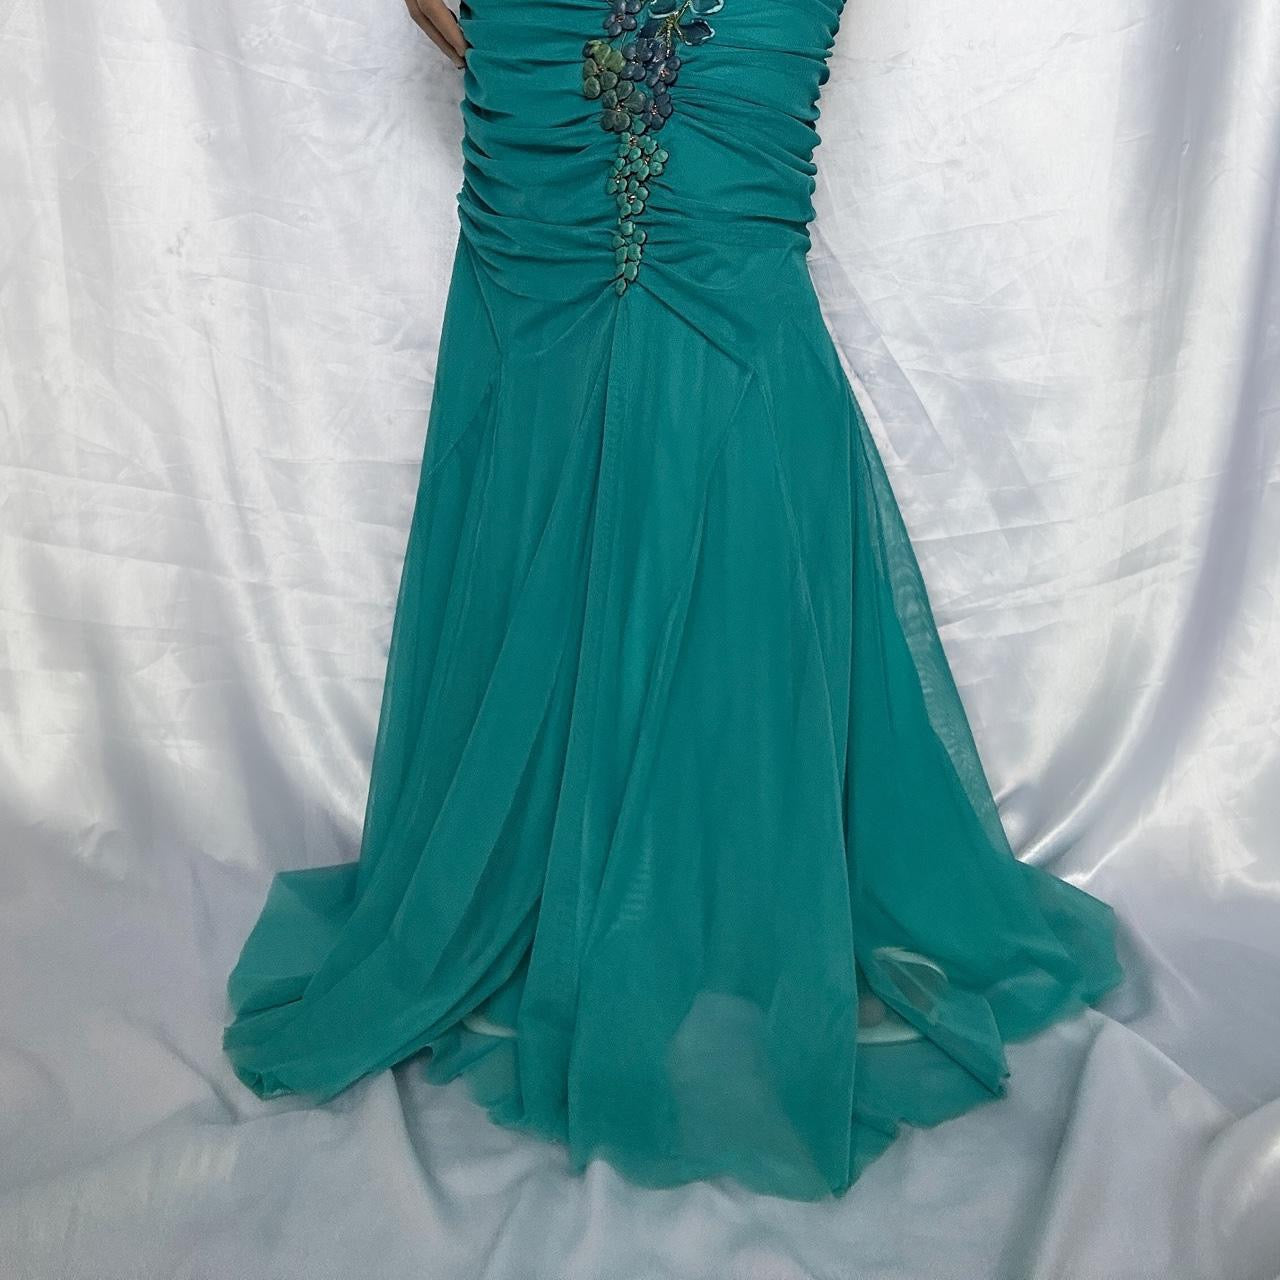 Stunning Vintage 90s Ema Savahl Turquoise Hand Painted Floral Fishtail Gown